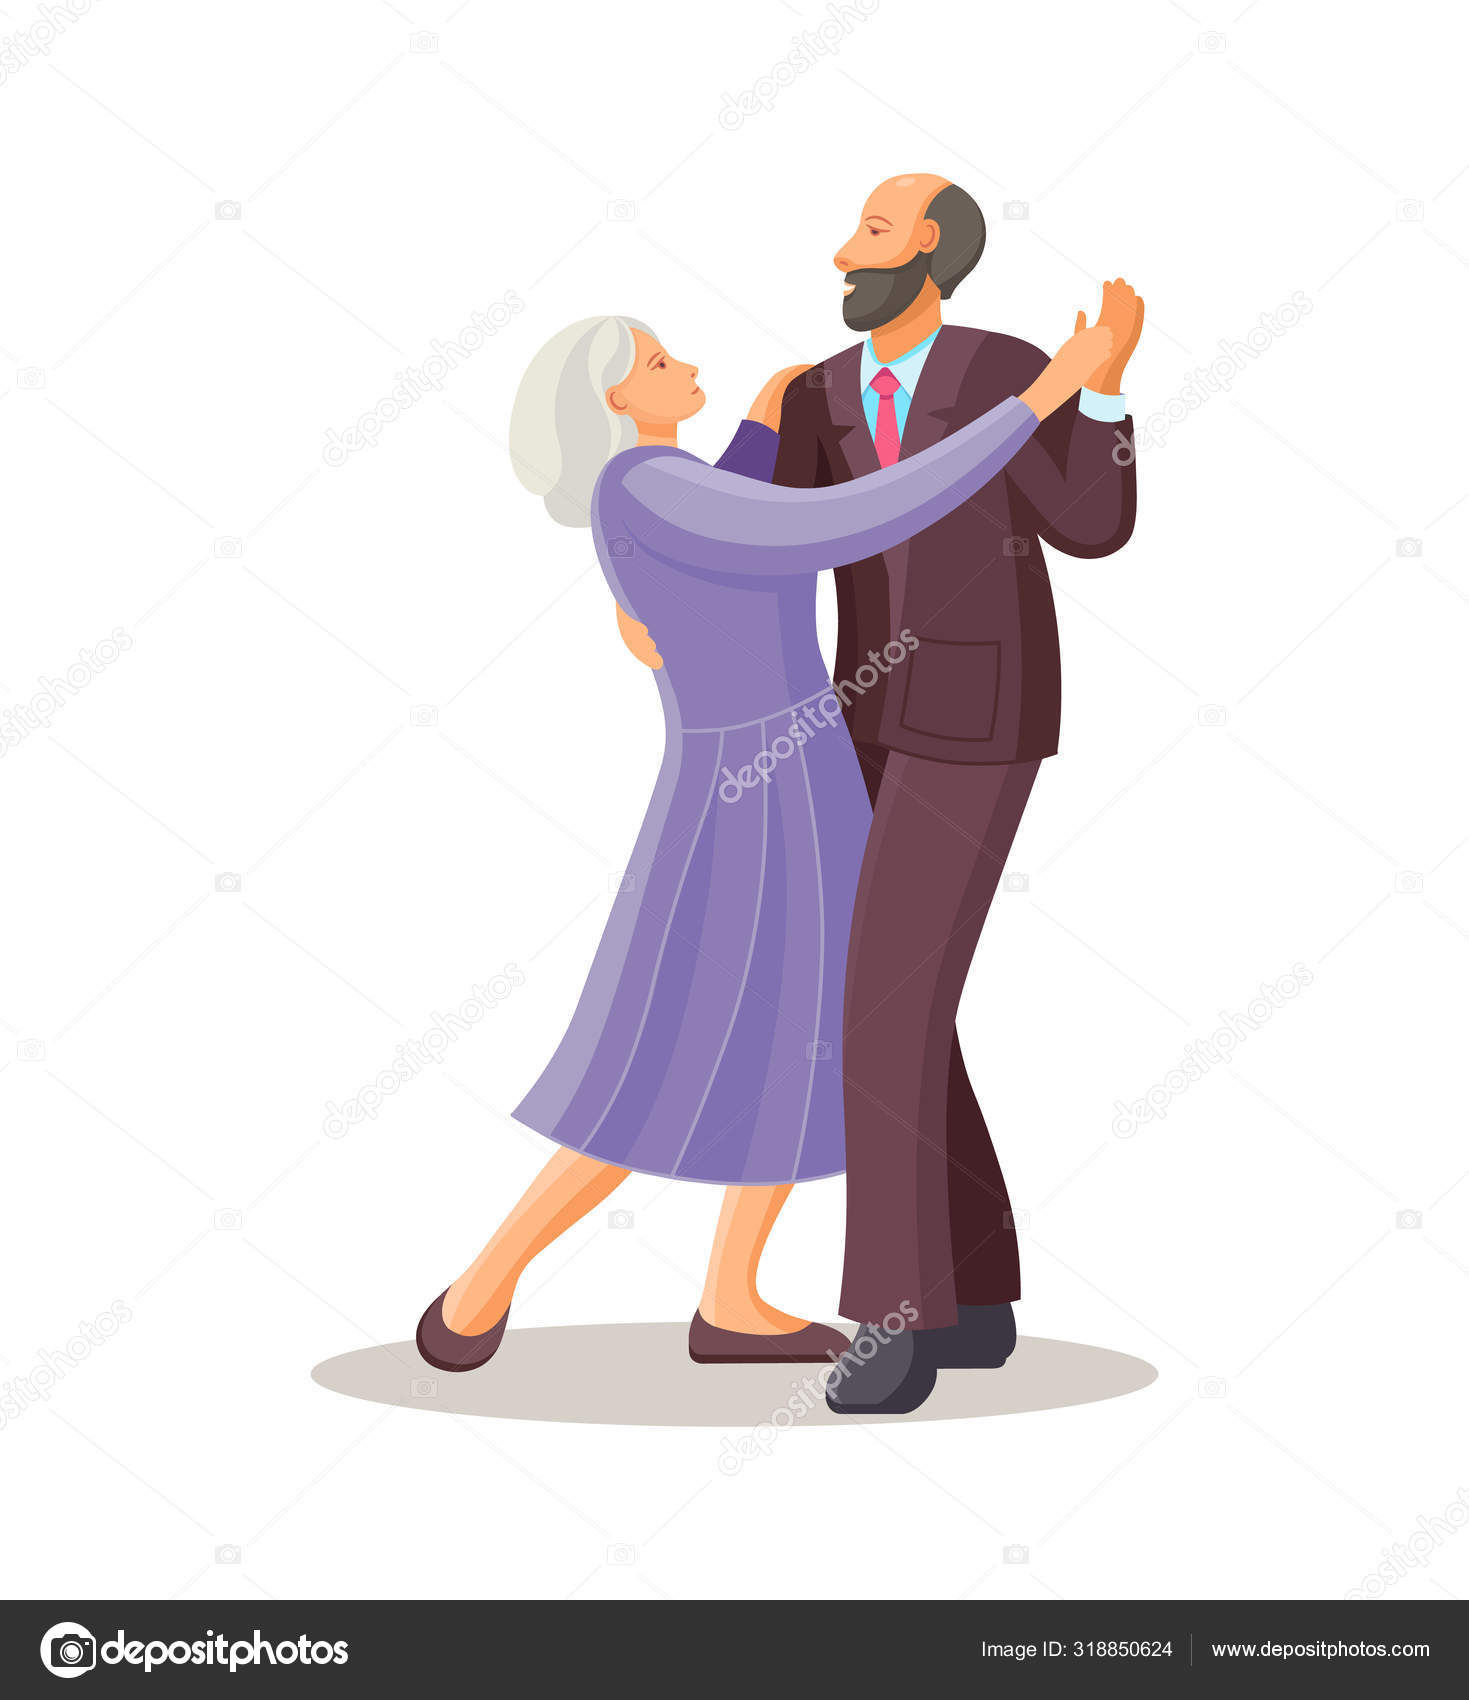 Person people vector illustration dance party woman and man. Happy